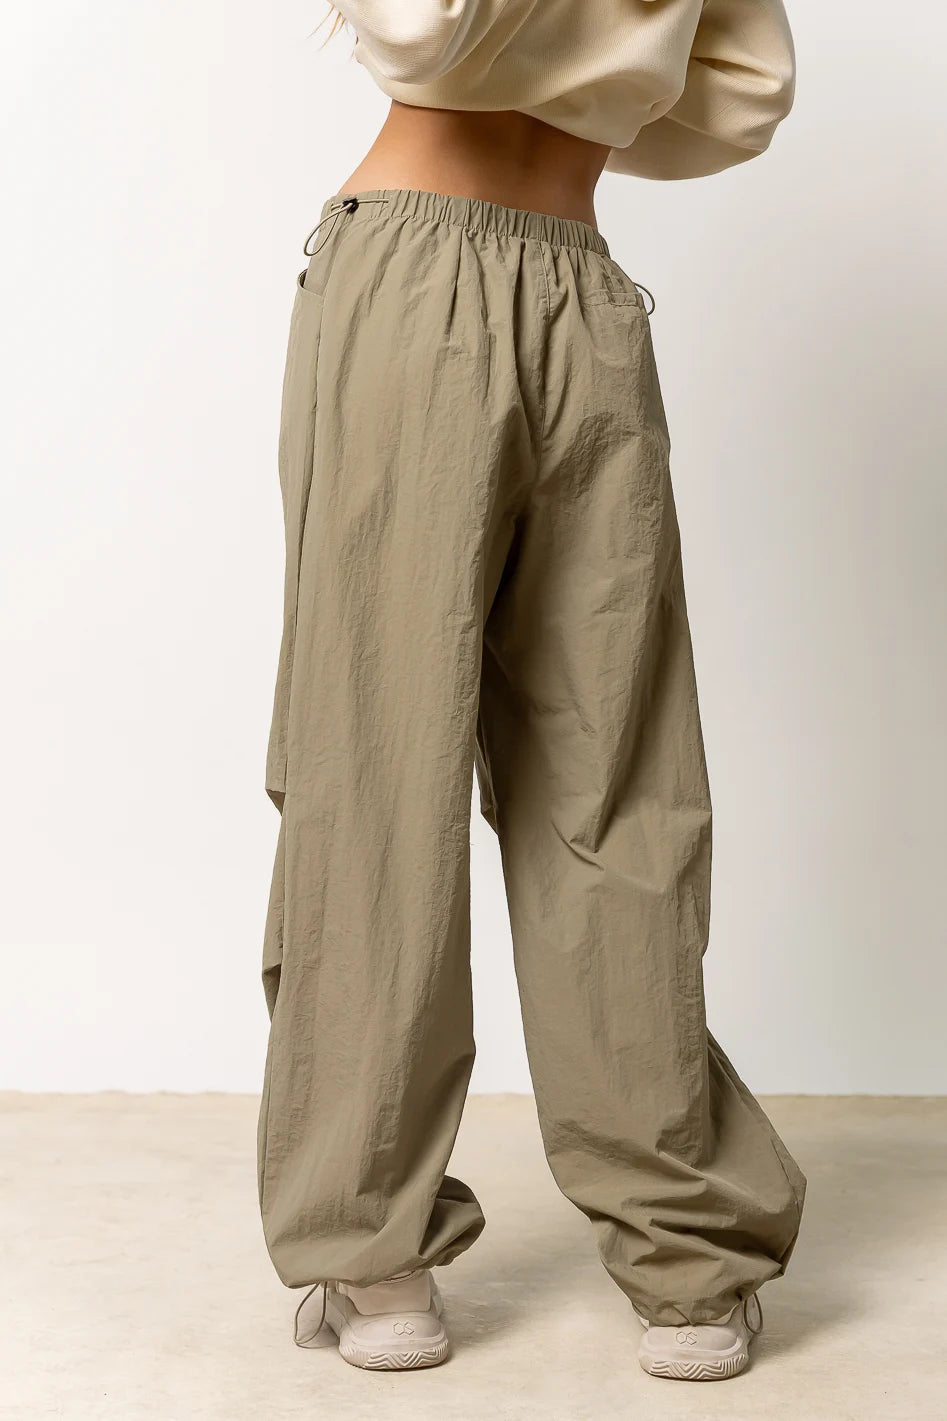 Division Parachute Pants – The Ragged Priest